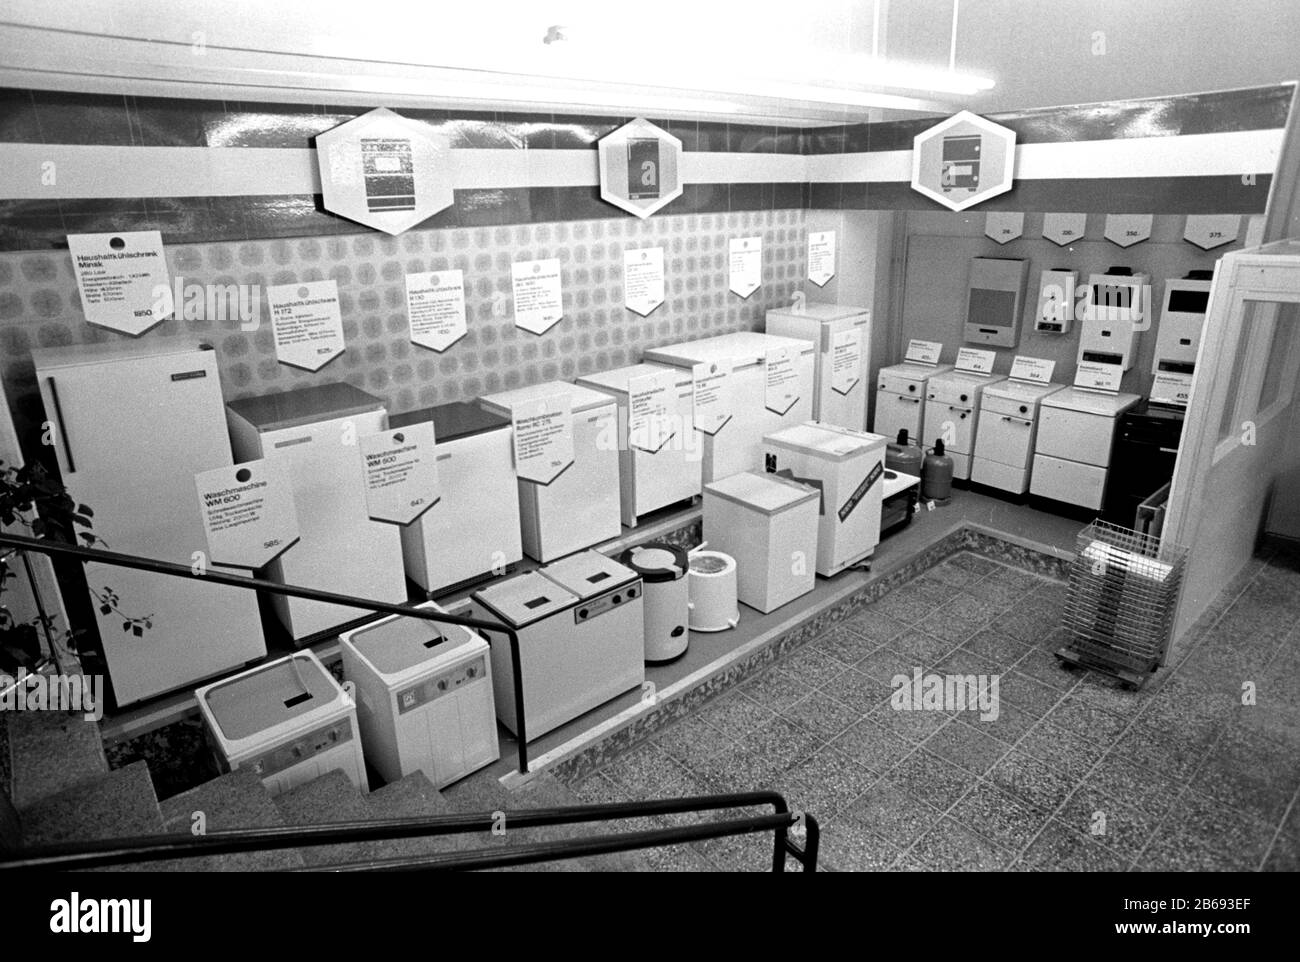 30 November 1988, Saxony, Eilenburg: Refrigerators, washing machines (WM 66), gas stoves and instantaneous water heaters - A reconstructed and converted consumer retail store for electrical goods is handed over in Eilenburg at the end of the 1980s. Exact date of recording not known. Photo: Volkmar Heinz/dpa-Zentralbild/ZB Stock Photo